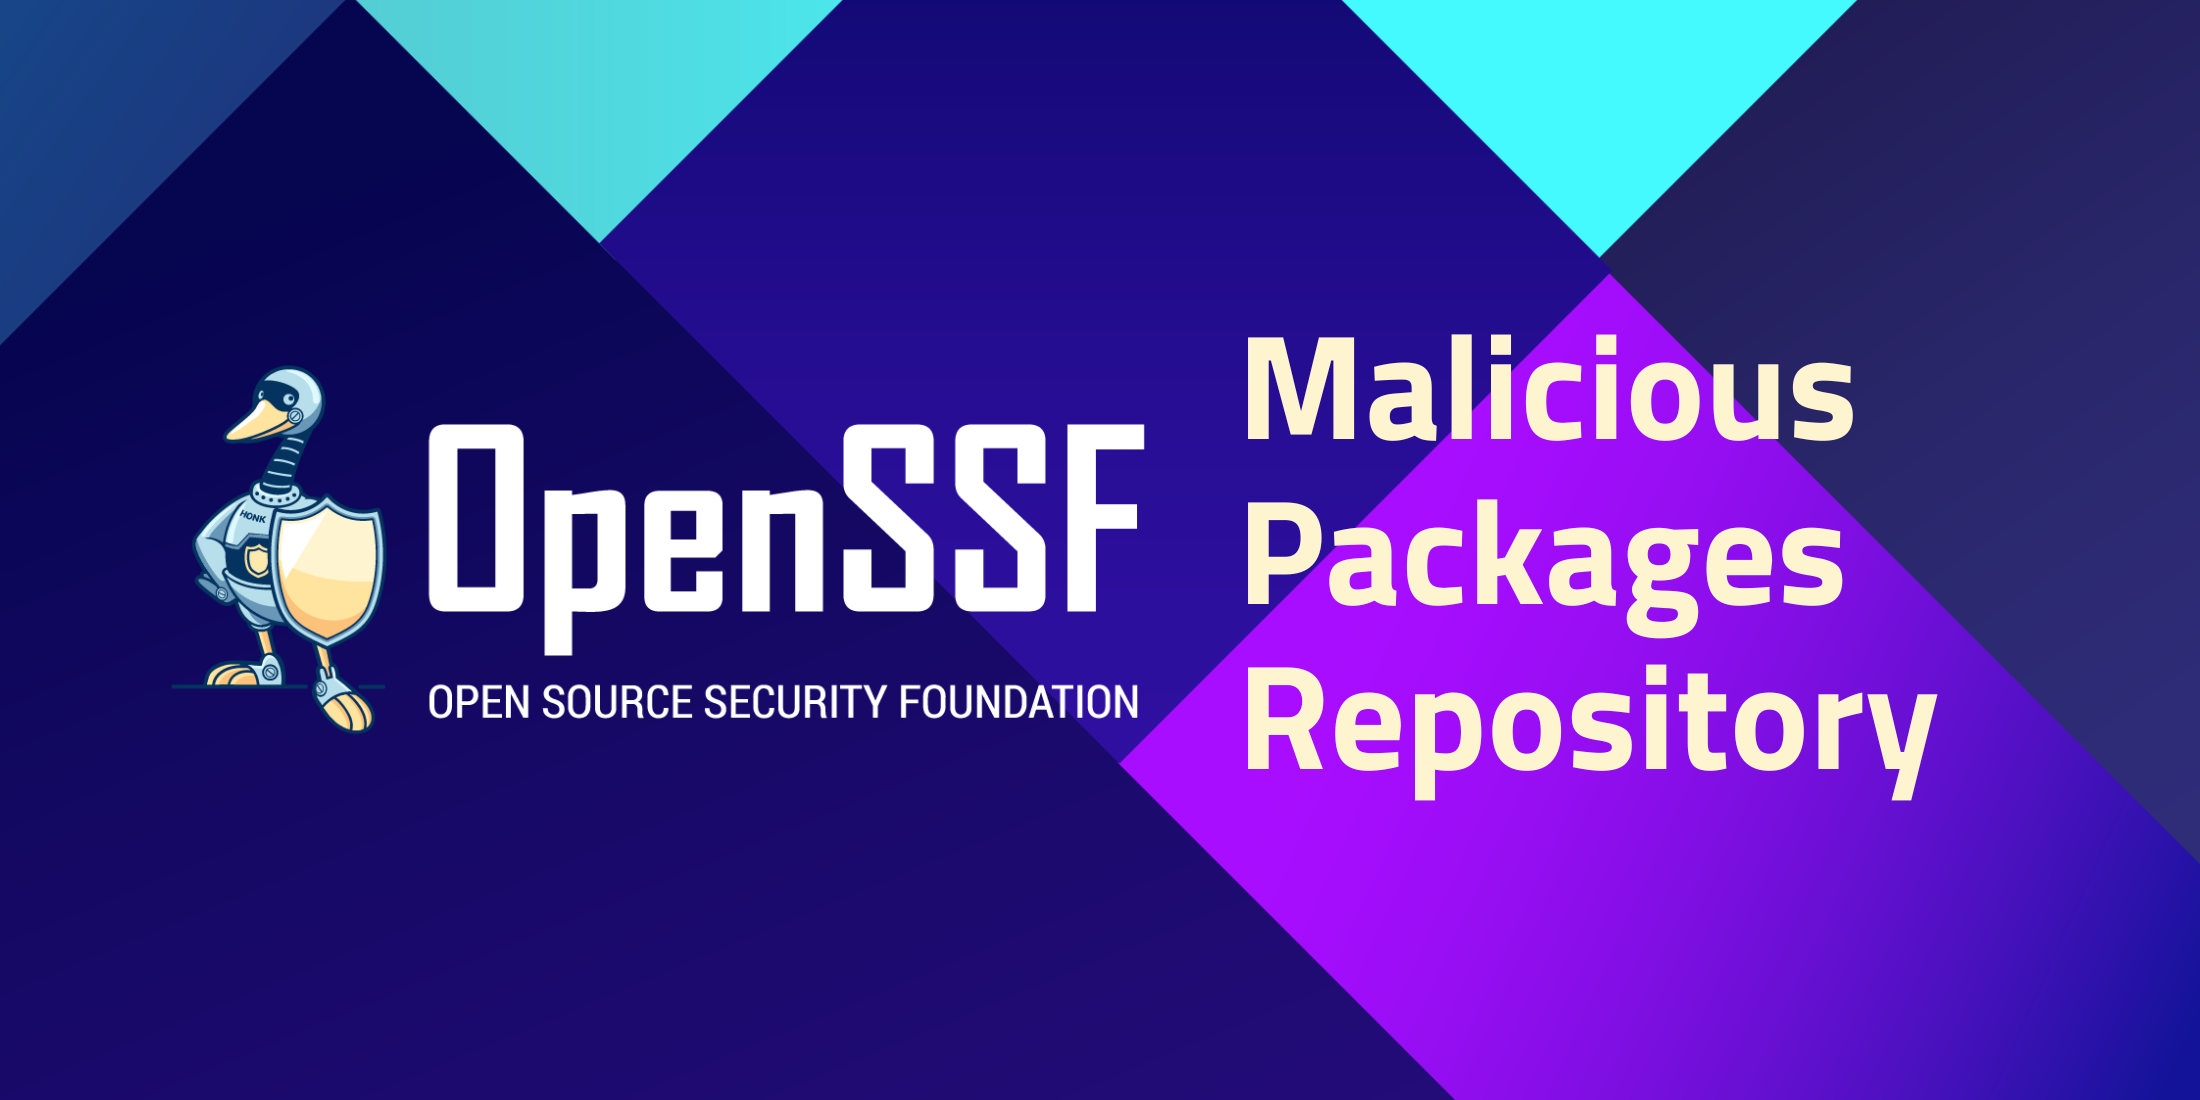 OpenSSF Malicious Packages Repository